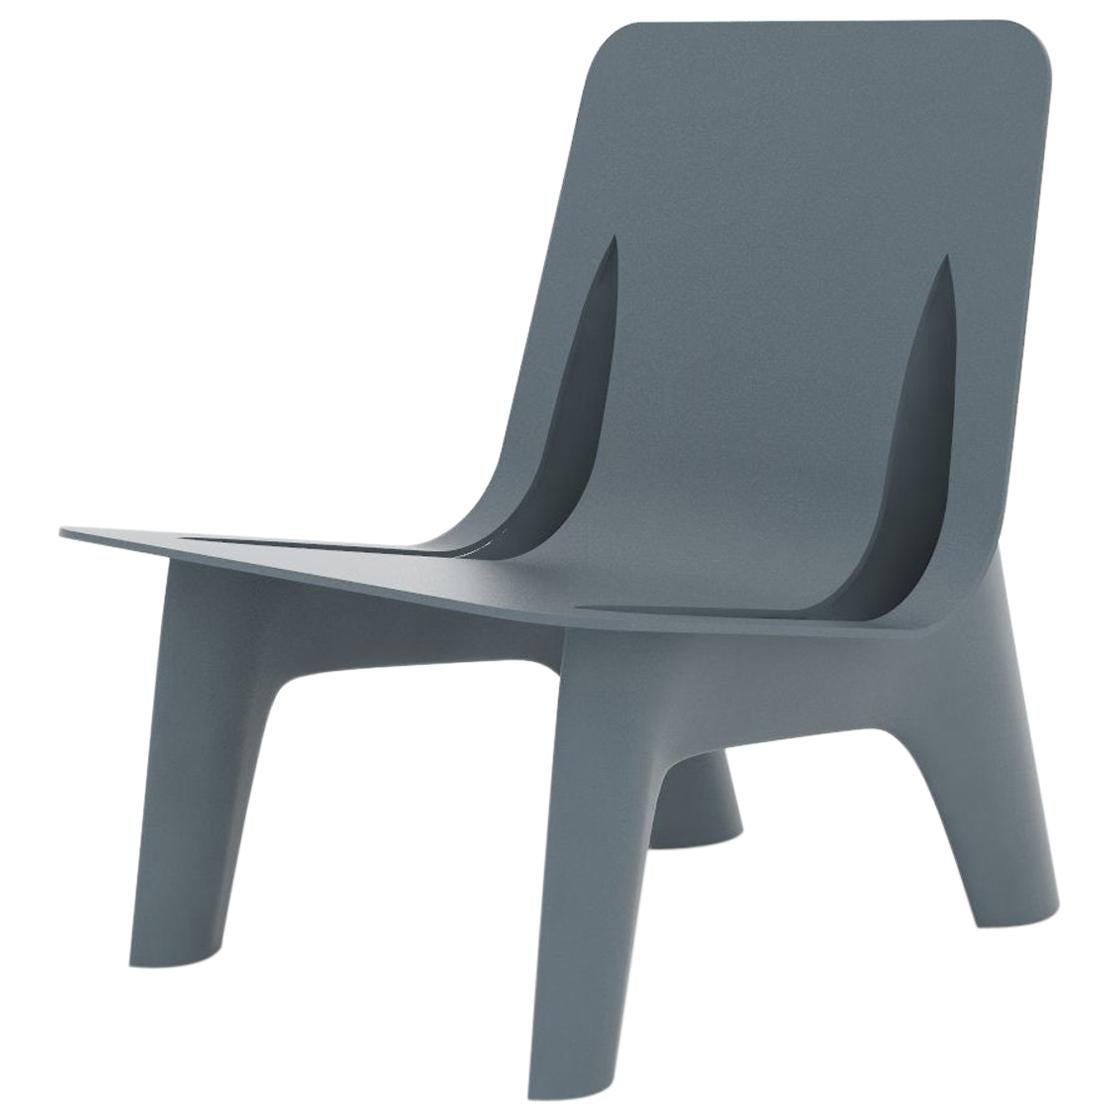 J-Chair Lounge Polished Grey Blue Color Carbon Steel Seating by Zieta For Sale